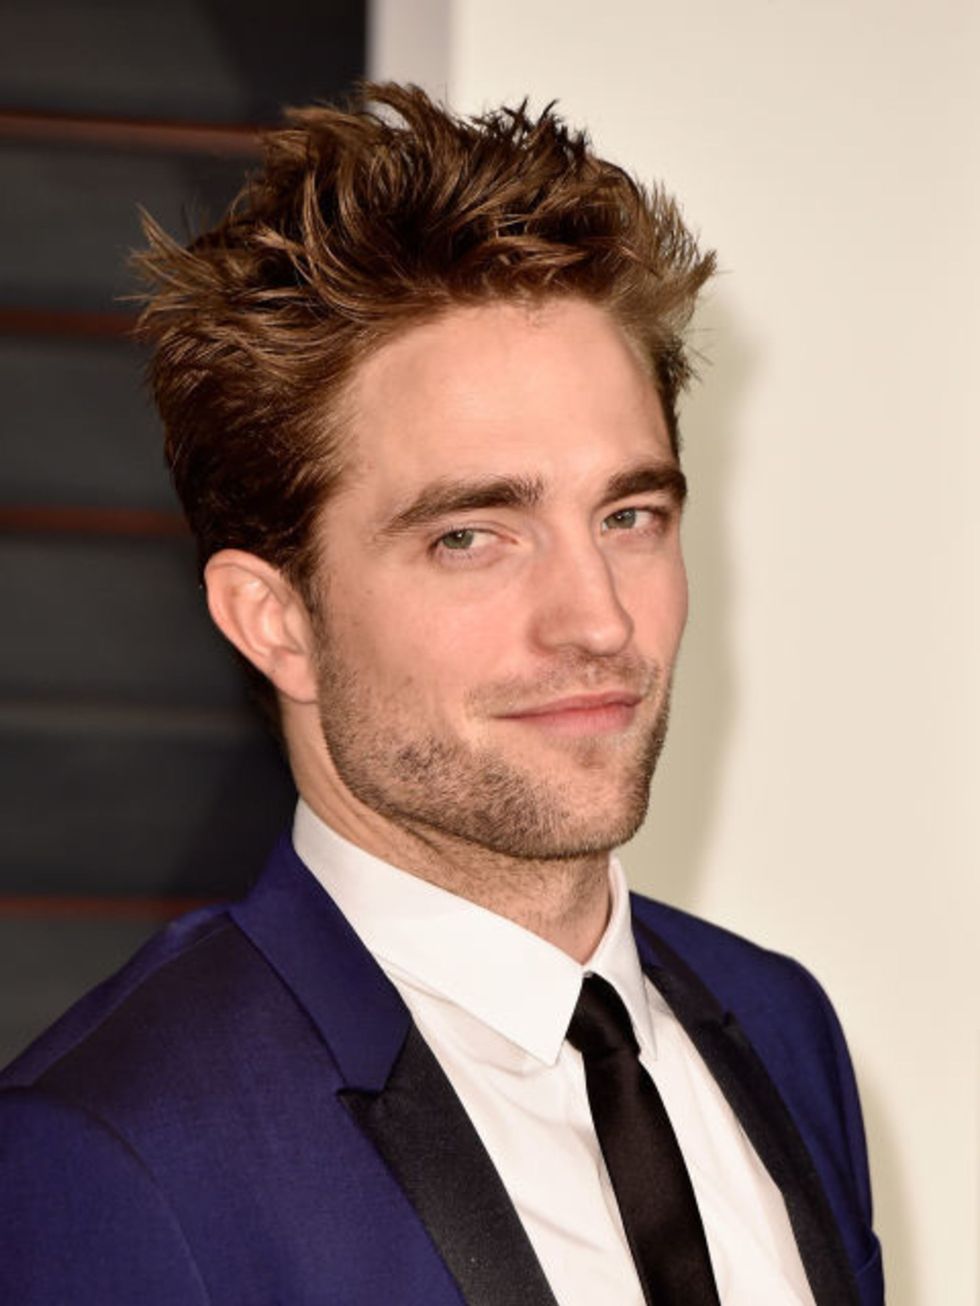 <p><strong>ROBERT PATTINSON HATES EDWARD AND 'TWILIGHT' IN GENERAL</strong></p>

<p>Robert Pattinson hates <em>Twilight</em>, hates Edward, and hates how everyone likes both. (P.S. There's even <a href="http://robertpattinsonhatingtwilight.tumblr.com/" st